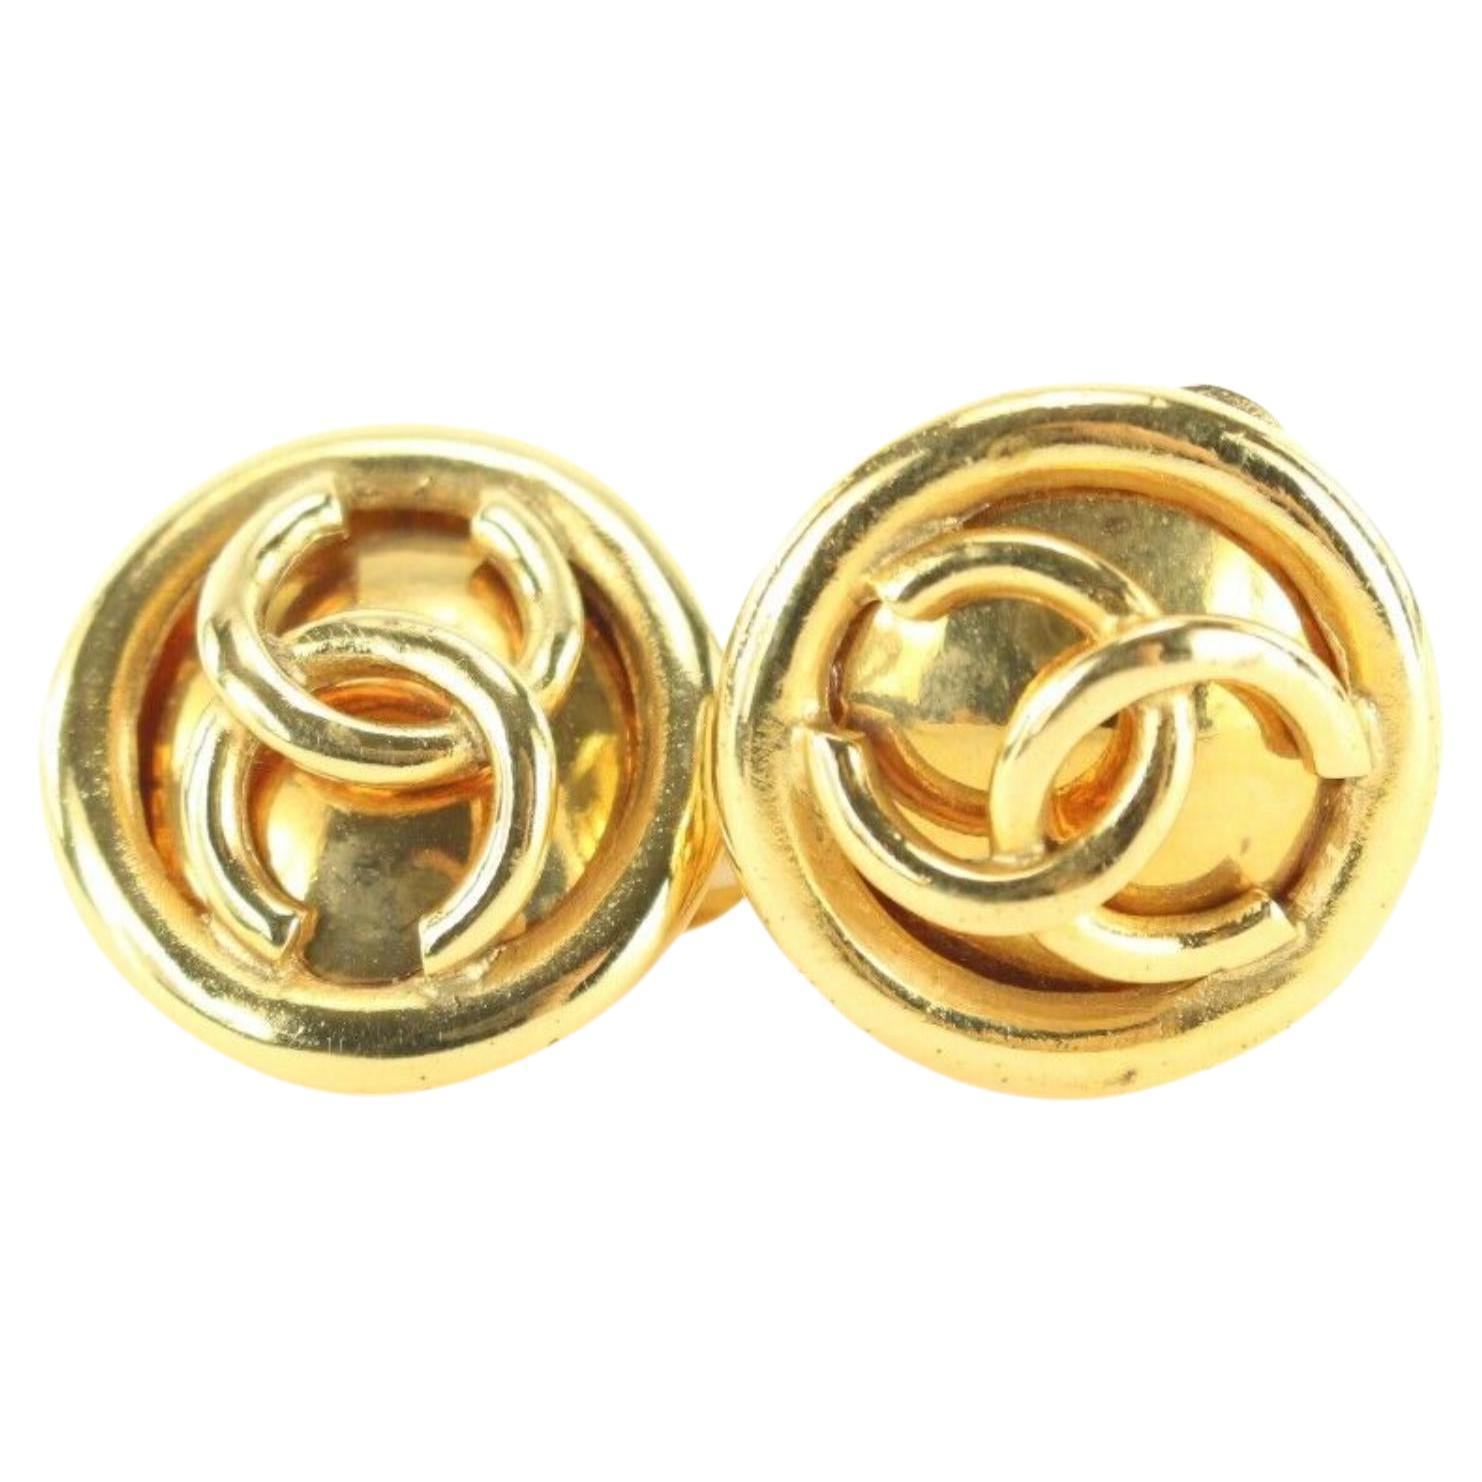 Chanel 24k Gold Plated CC Round Earrings Clip-On 1CK1202